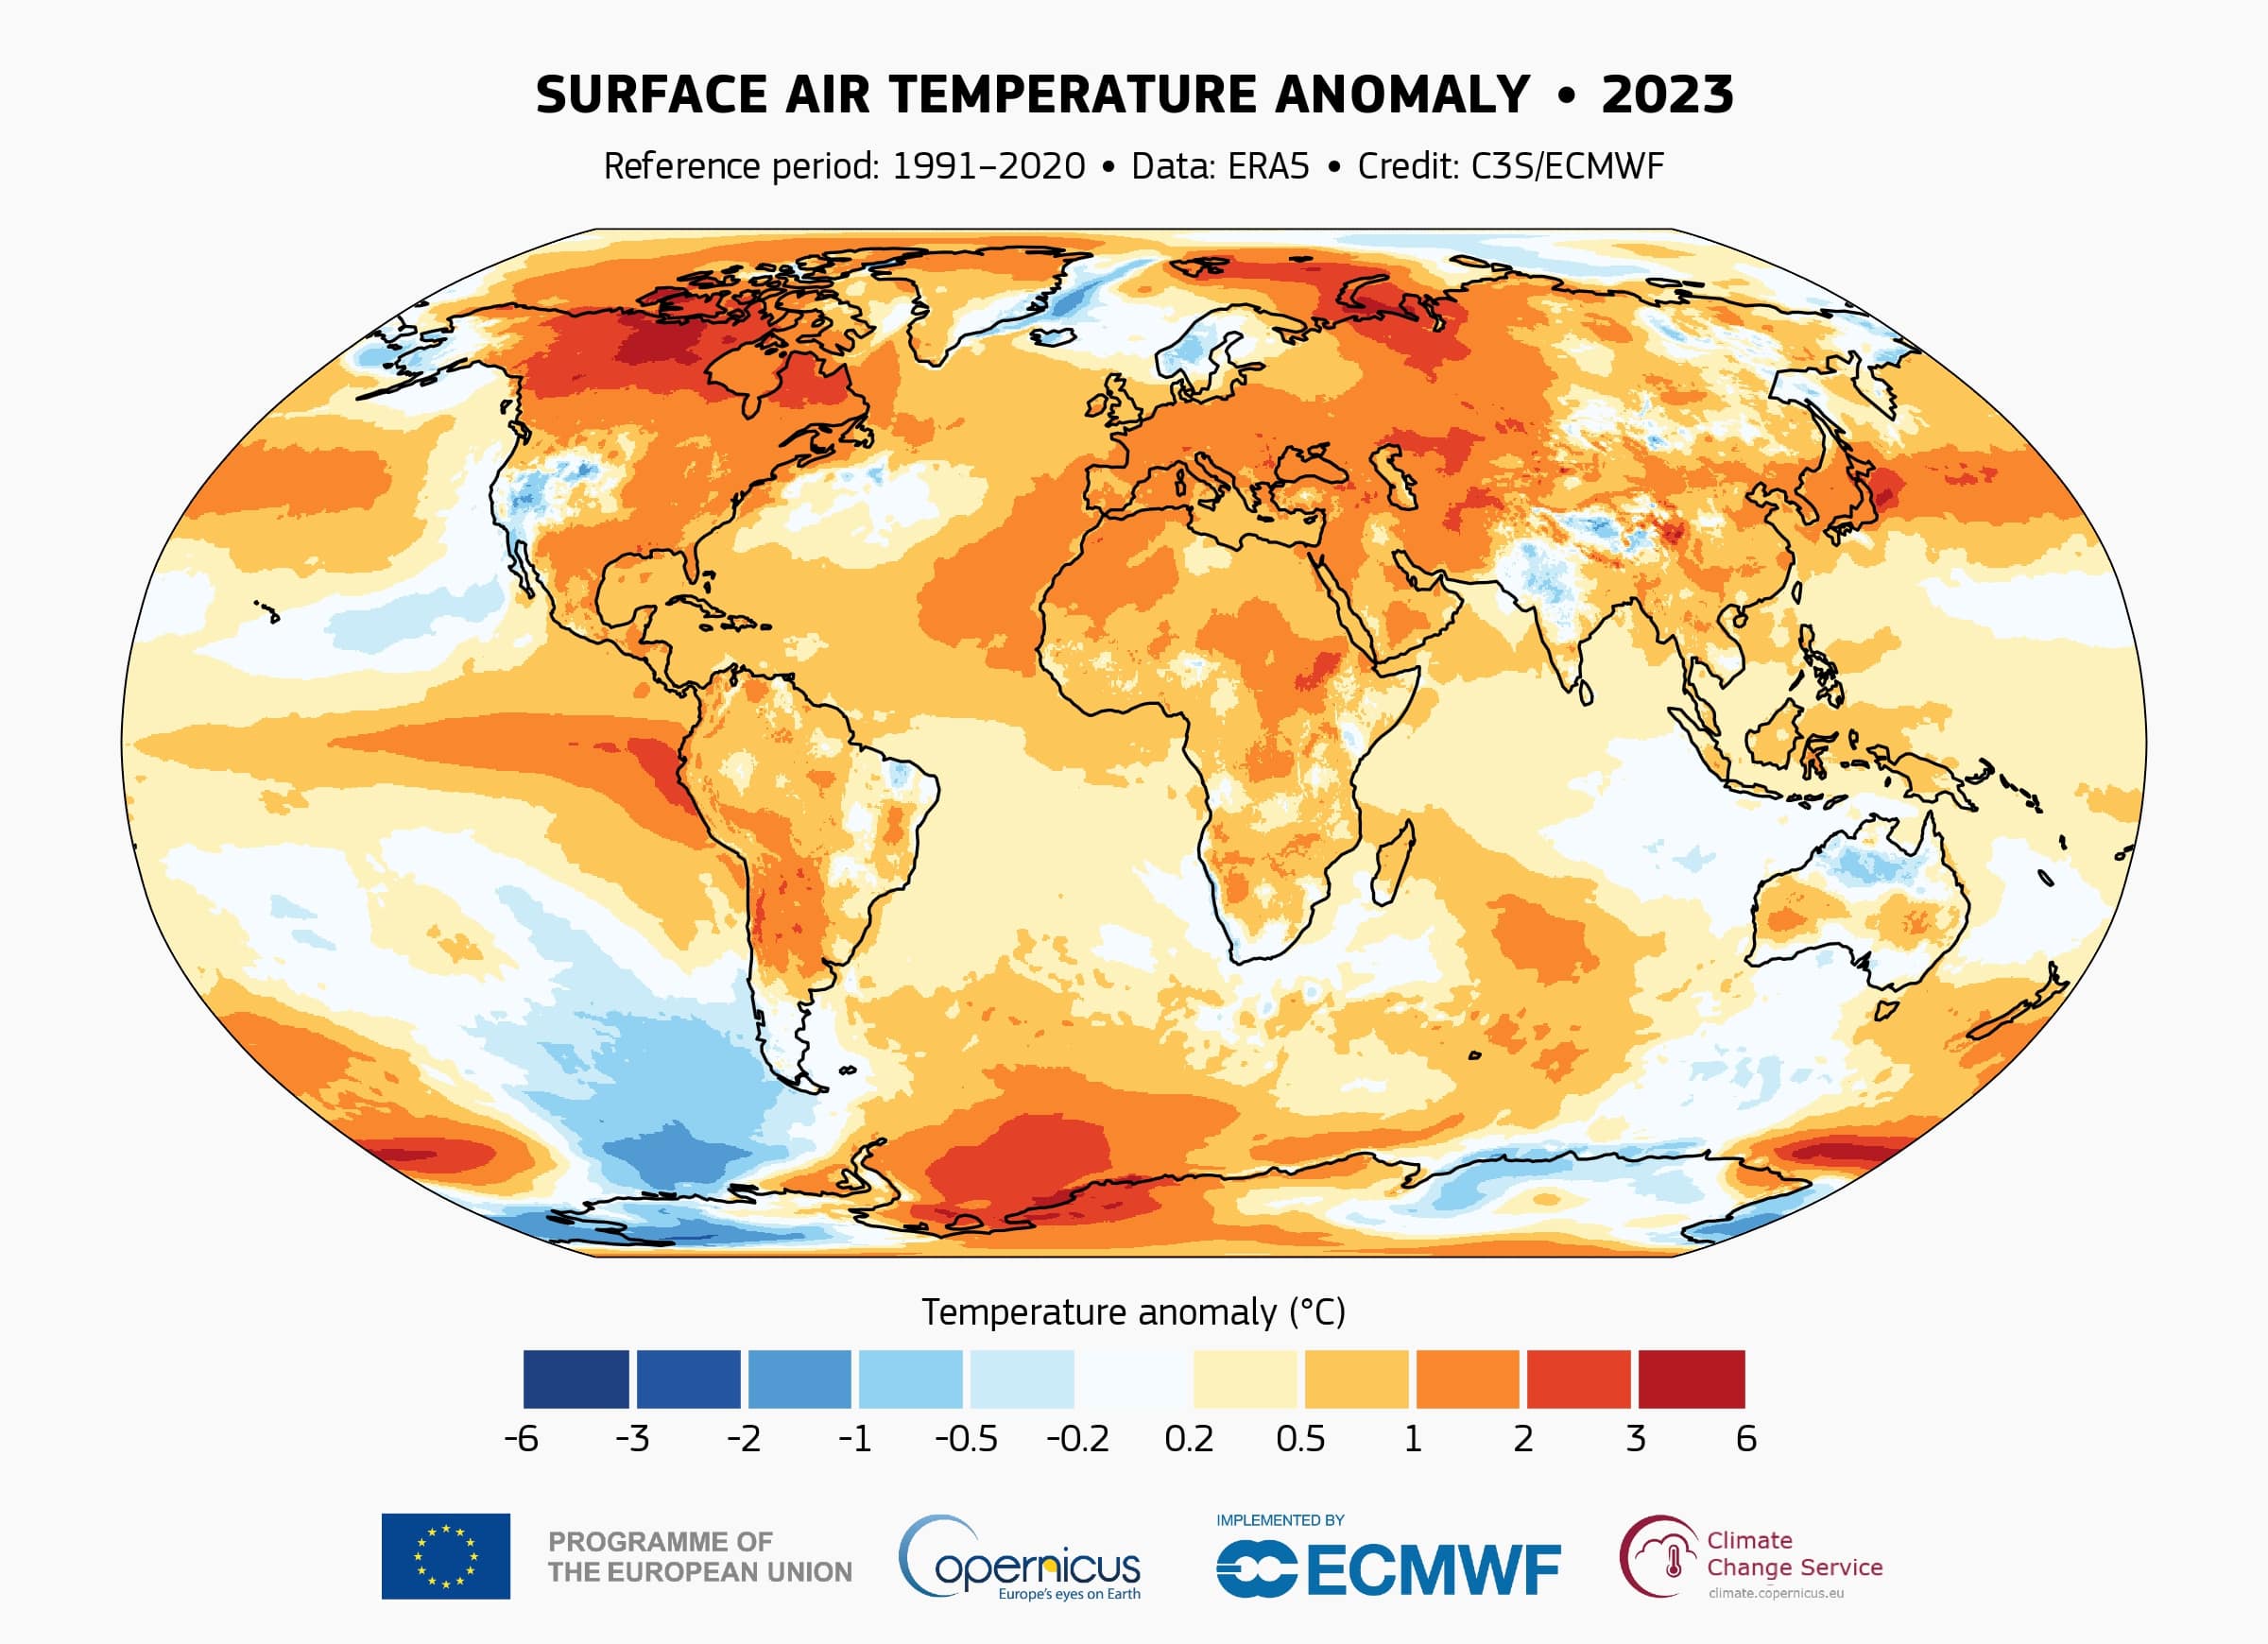 Global surface temperature